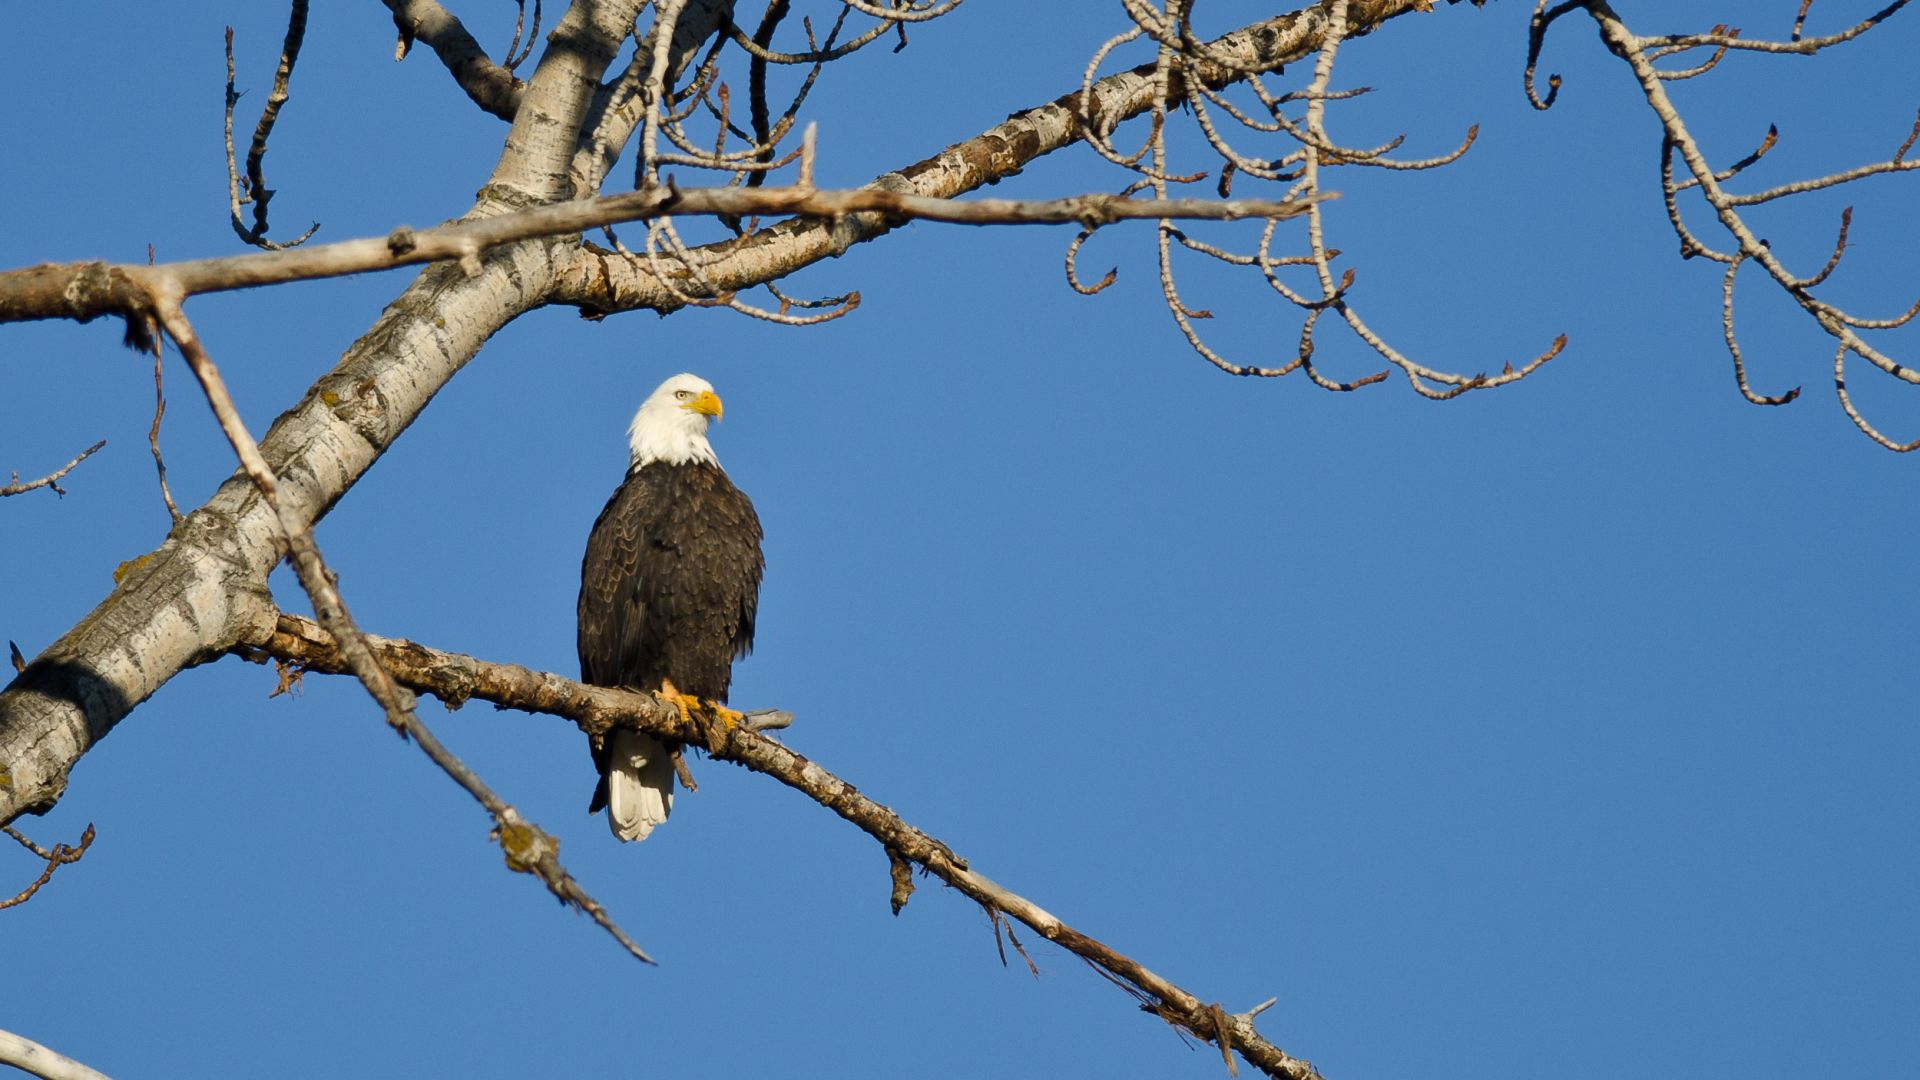 A bald eagle sitting on the branch of a tree with a blue sky background